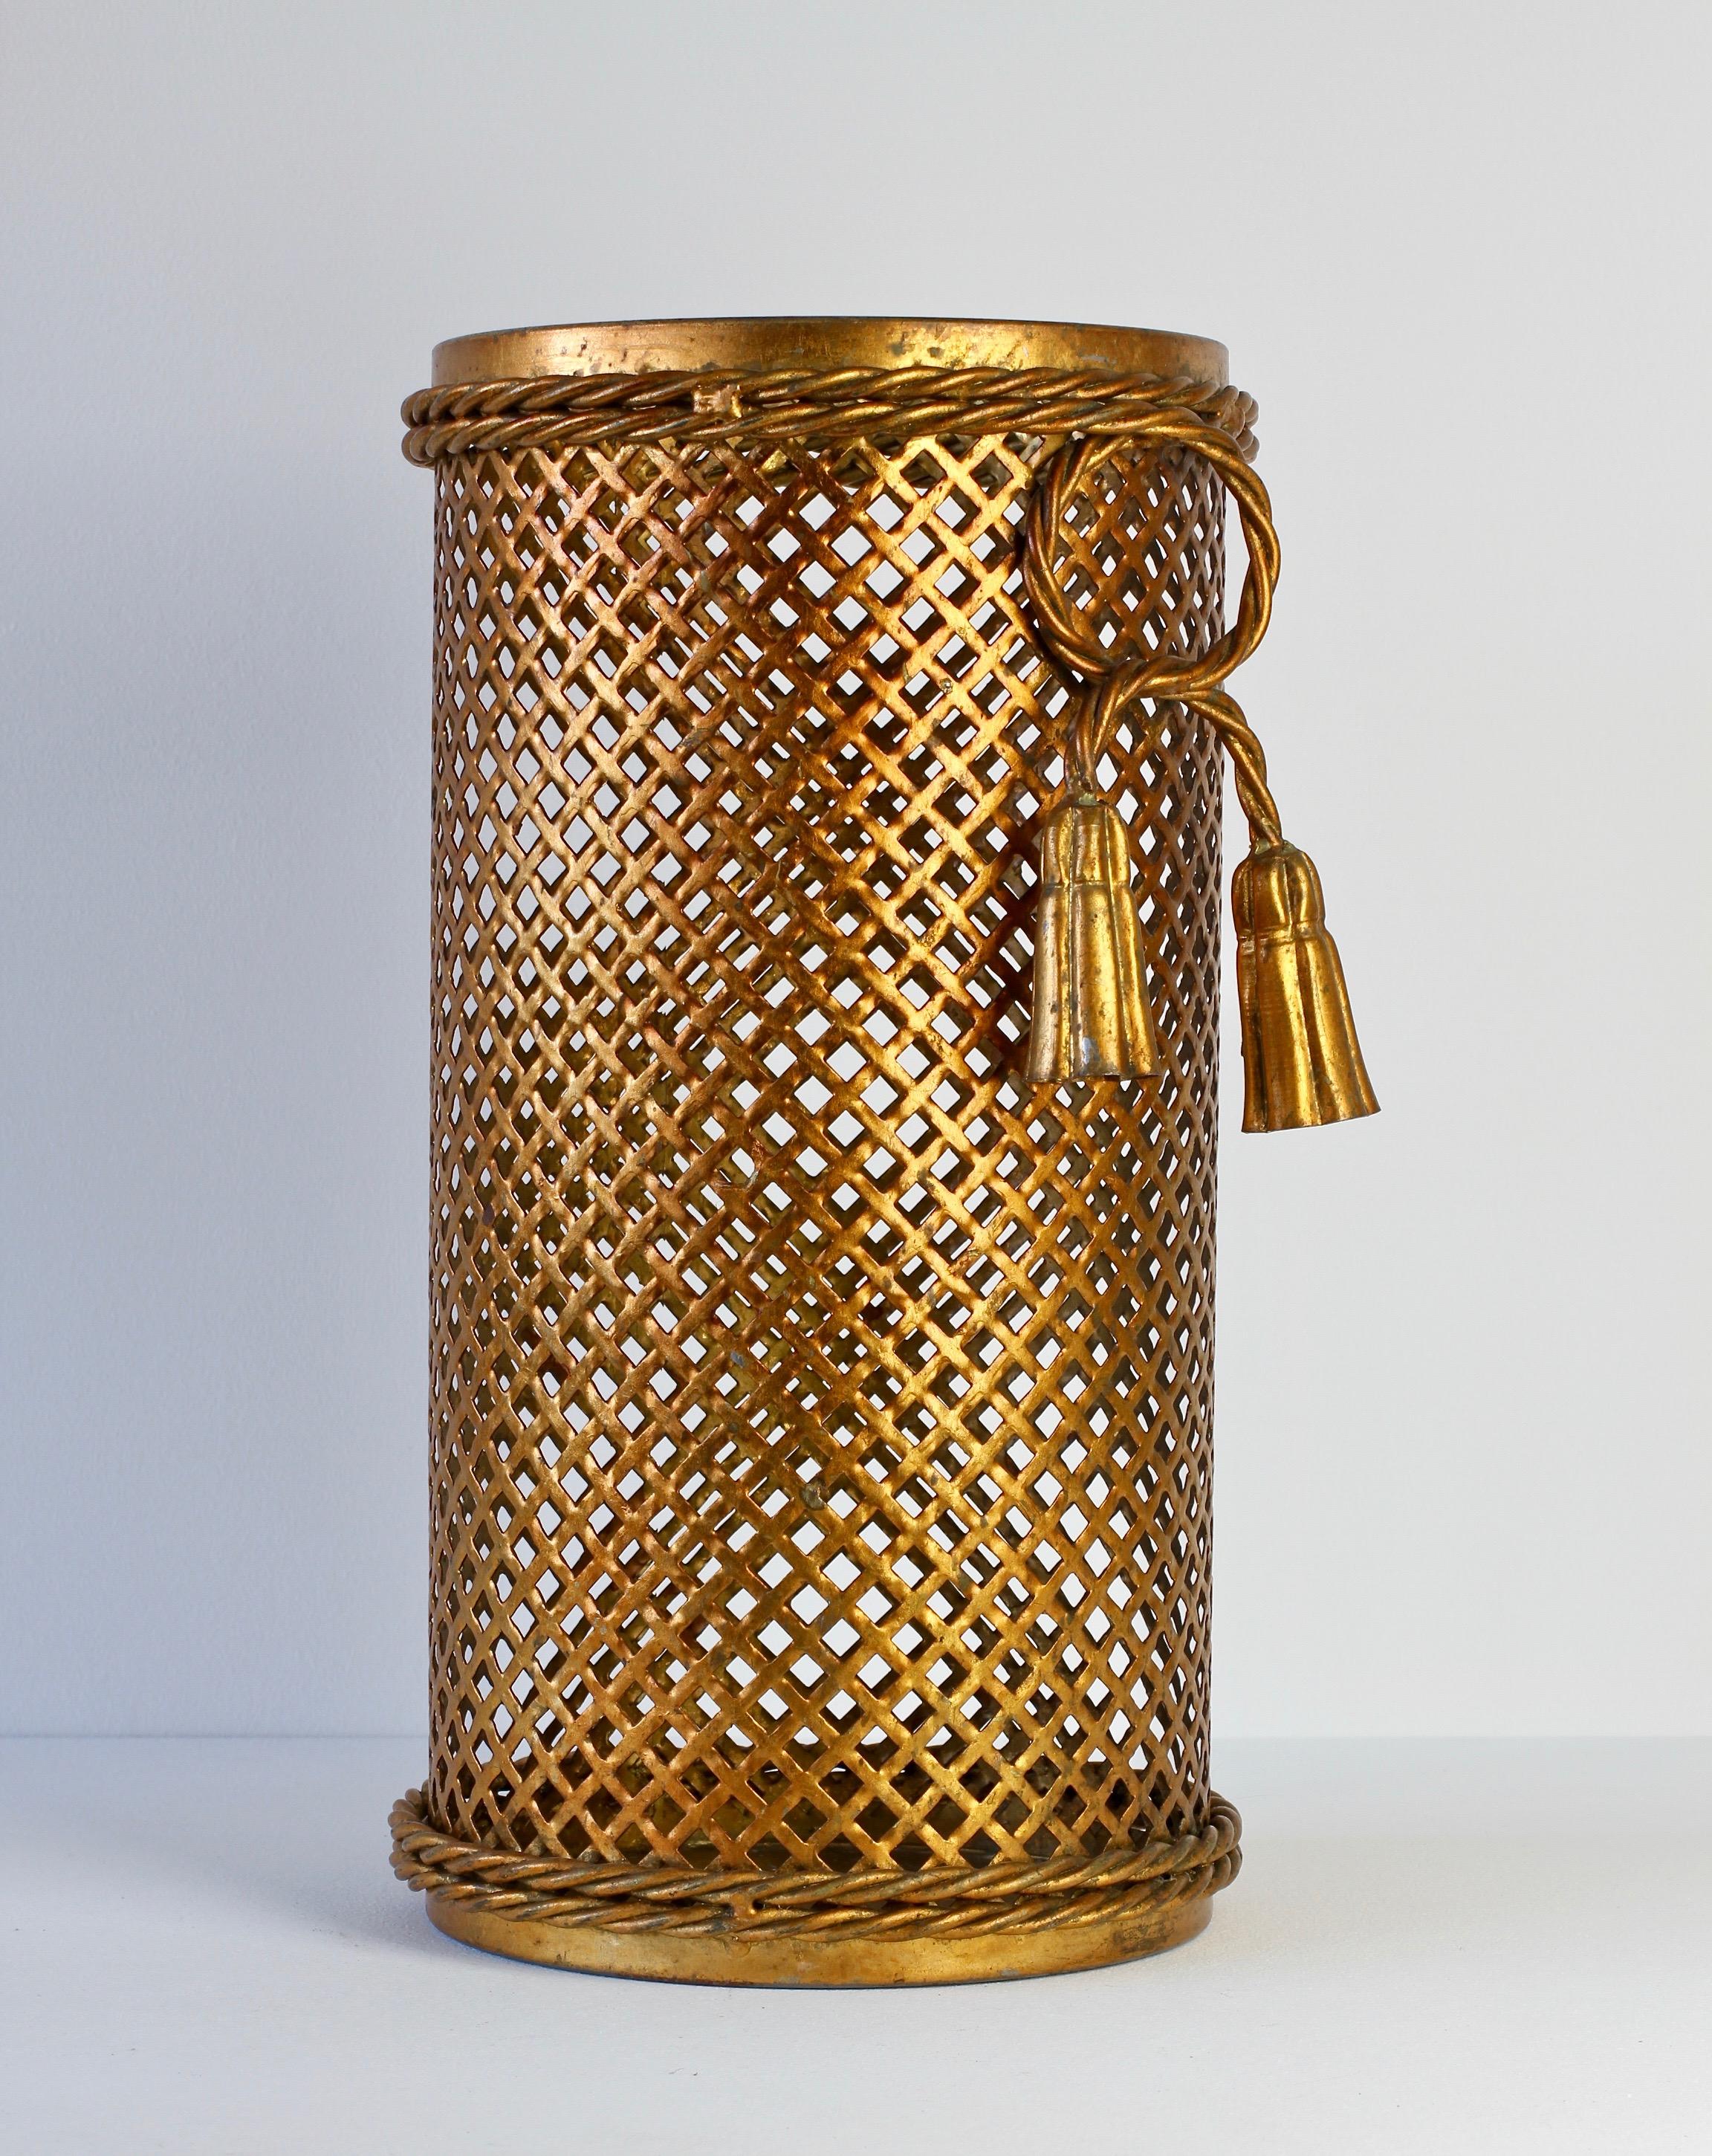 Midcentury gold, gilt, gilded Hollywood Regency style umbrella stand or holder made in Florence, Italy, circa 1950 by Li Puma Firenze. The perforated lattice patterned metalwork with bent rope and tassel details finishes the piece perfectly. 
